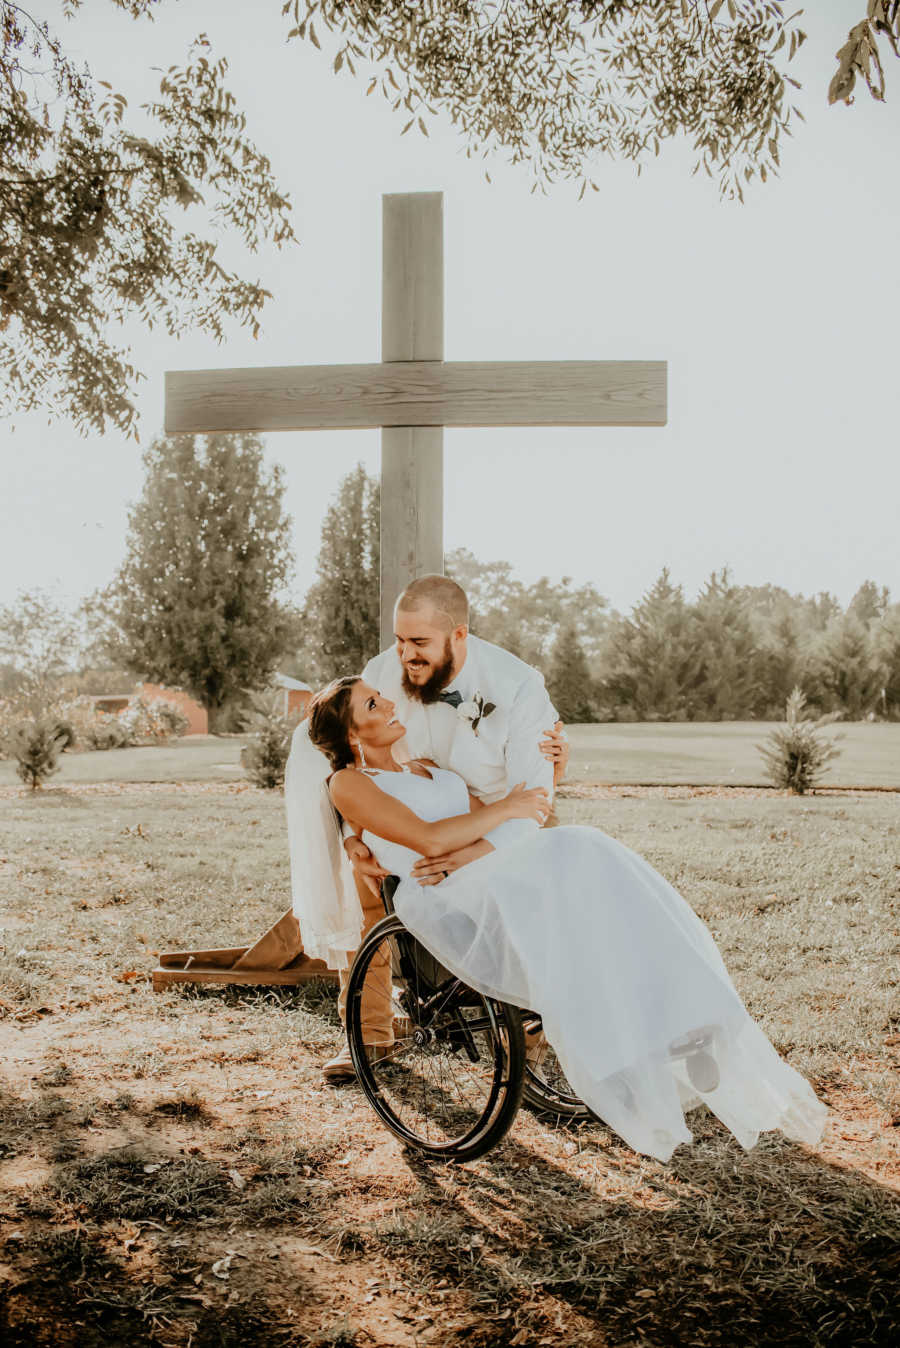 Groom drips paralyzed bride in wheelchair in front of large cross outside